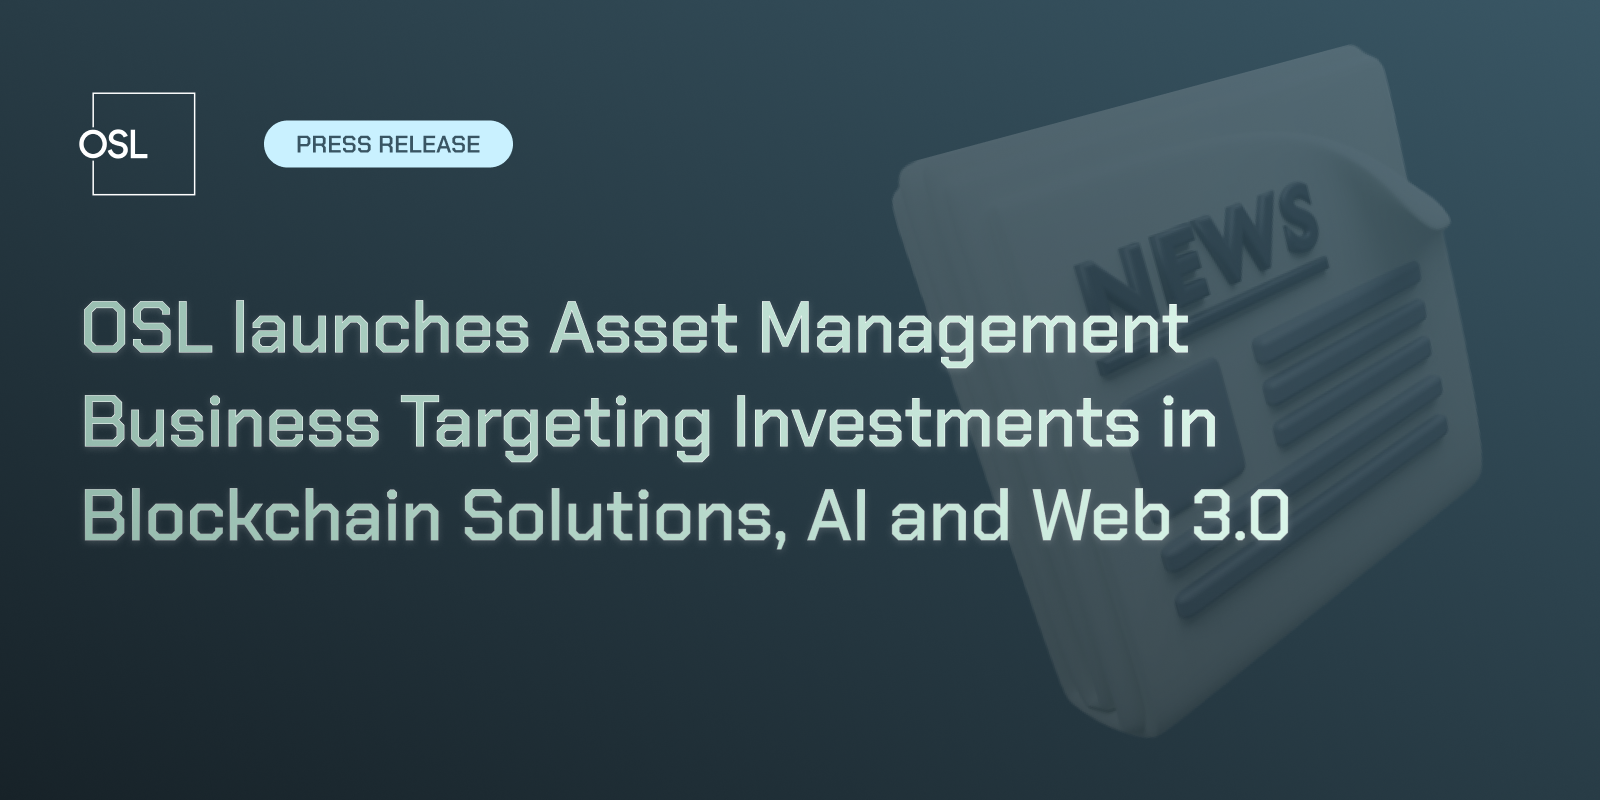 OSL launches Asset Management Business Targeting Investments in Blockchain Solutions, AI and Web 3.0